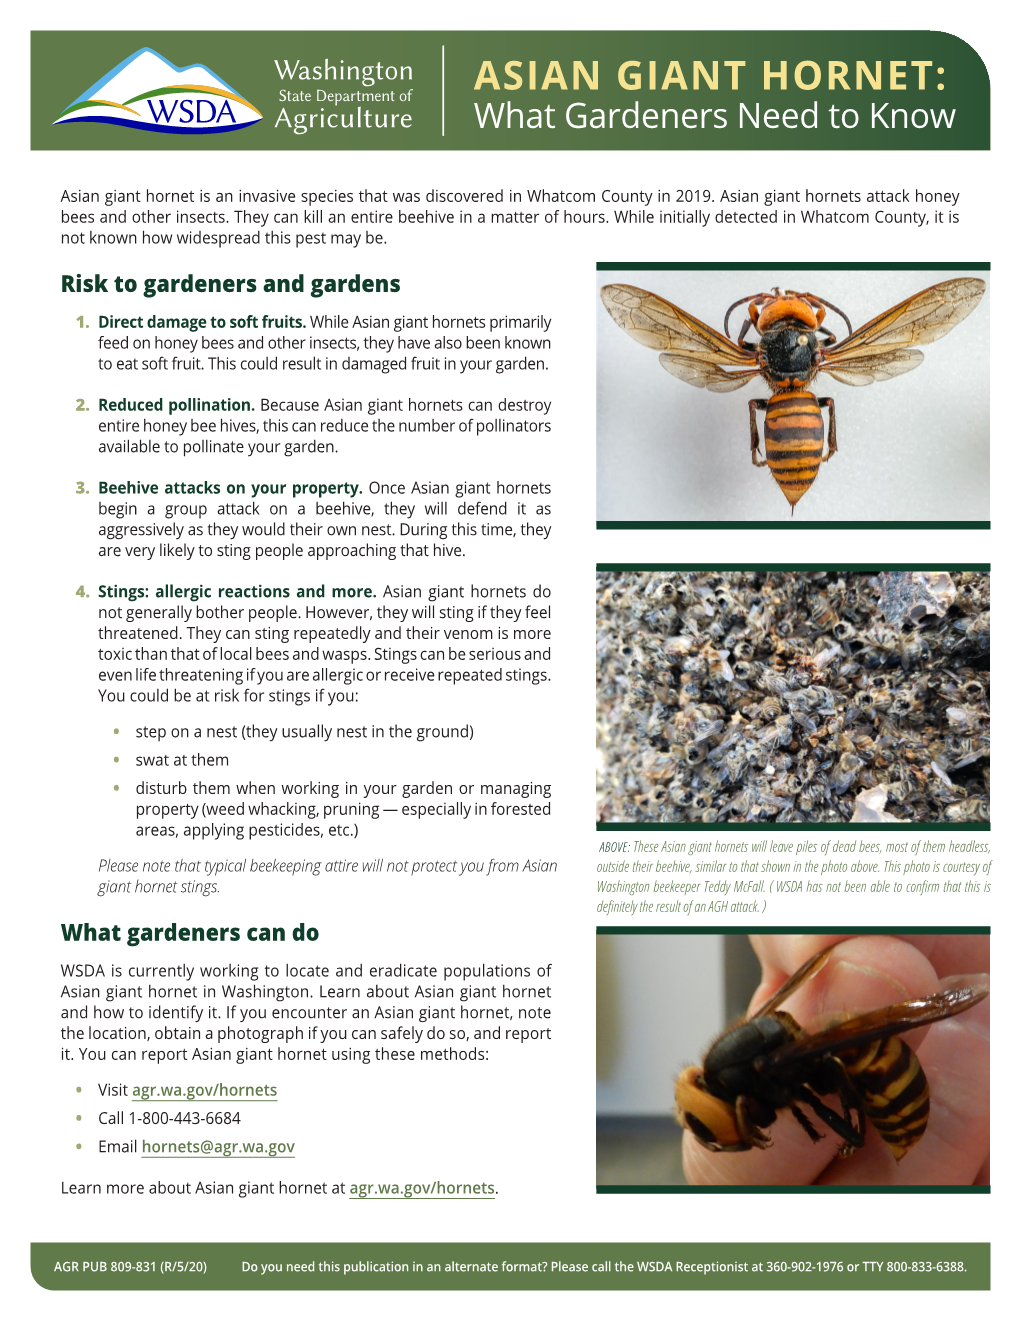 ASIAN GIANT HORNET: What Gardeners Need to Know